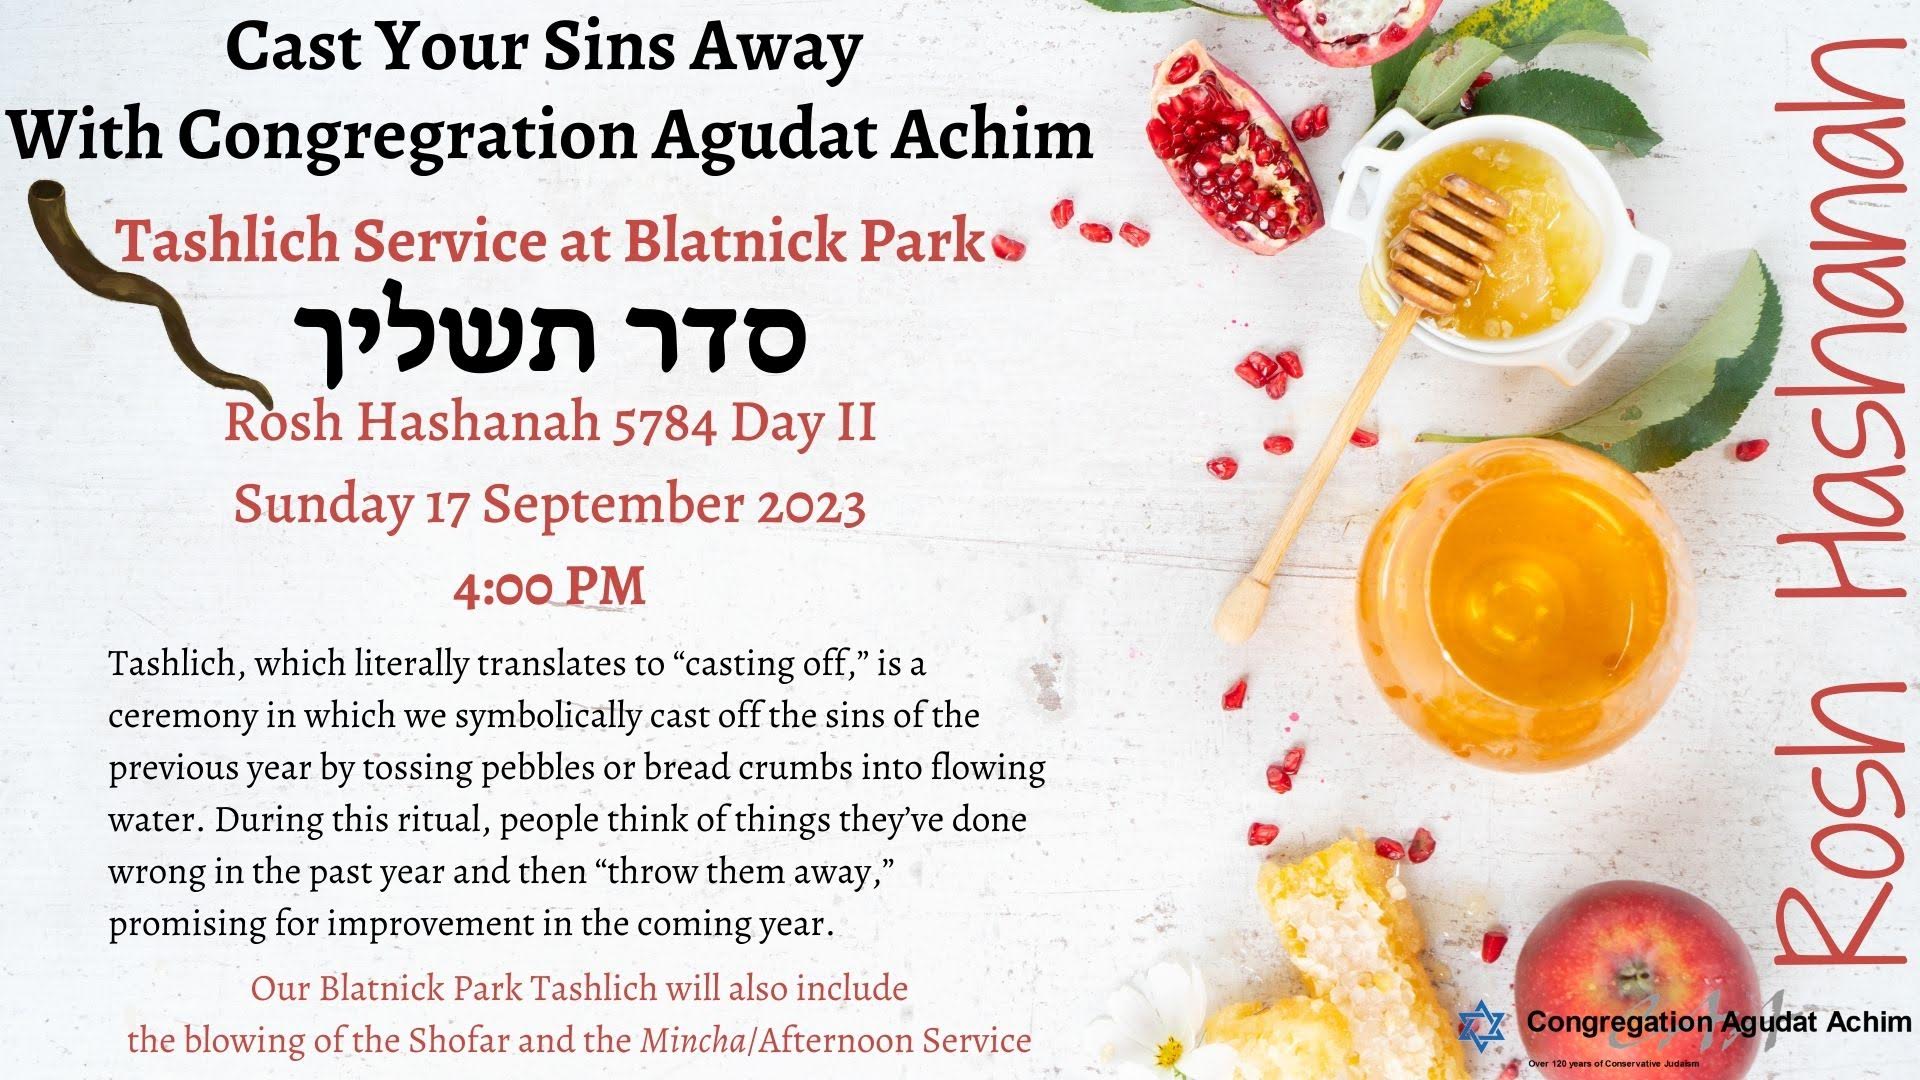 Come Cast Your Sins Away With Congregation Agudat Achim